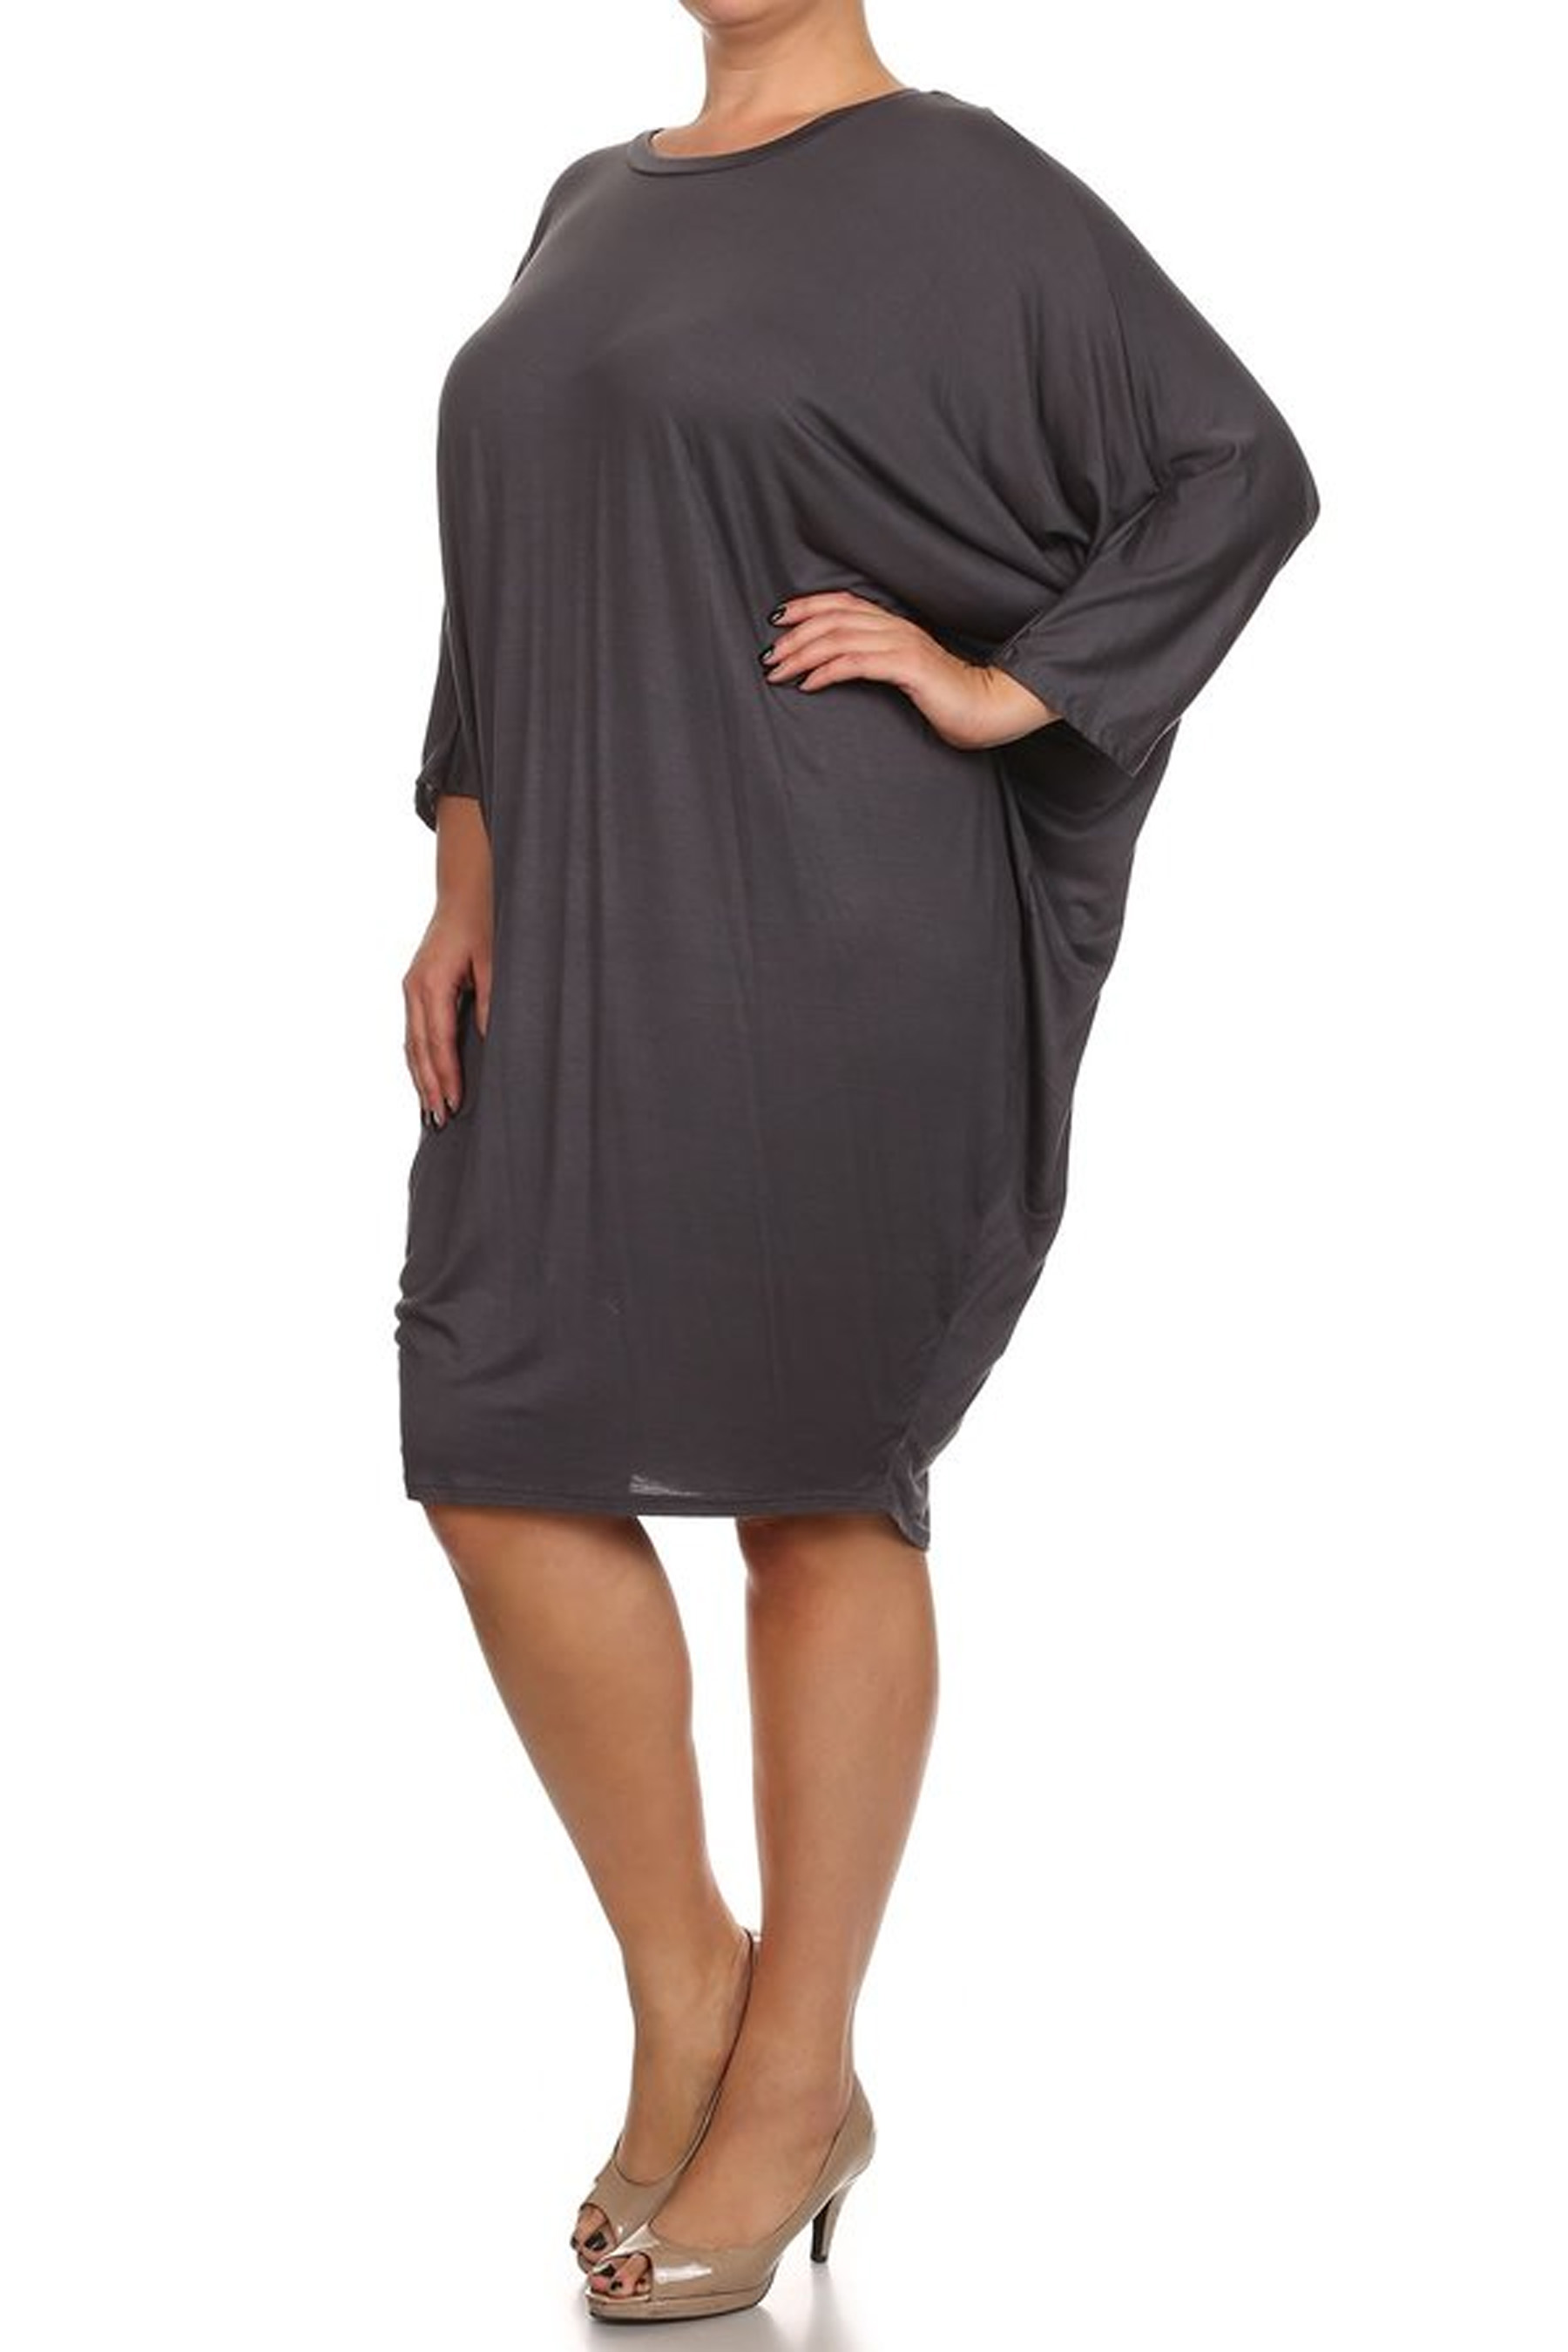 Women's Casual Plus Size Loose Fit Long Sleeve Dolman Style Midi Dress - image 2 of 4